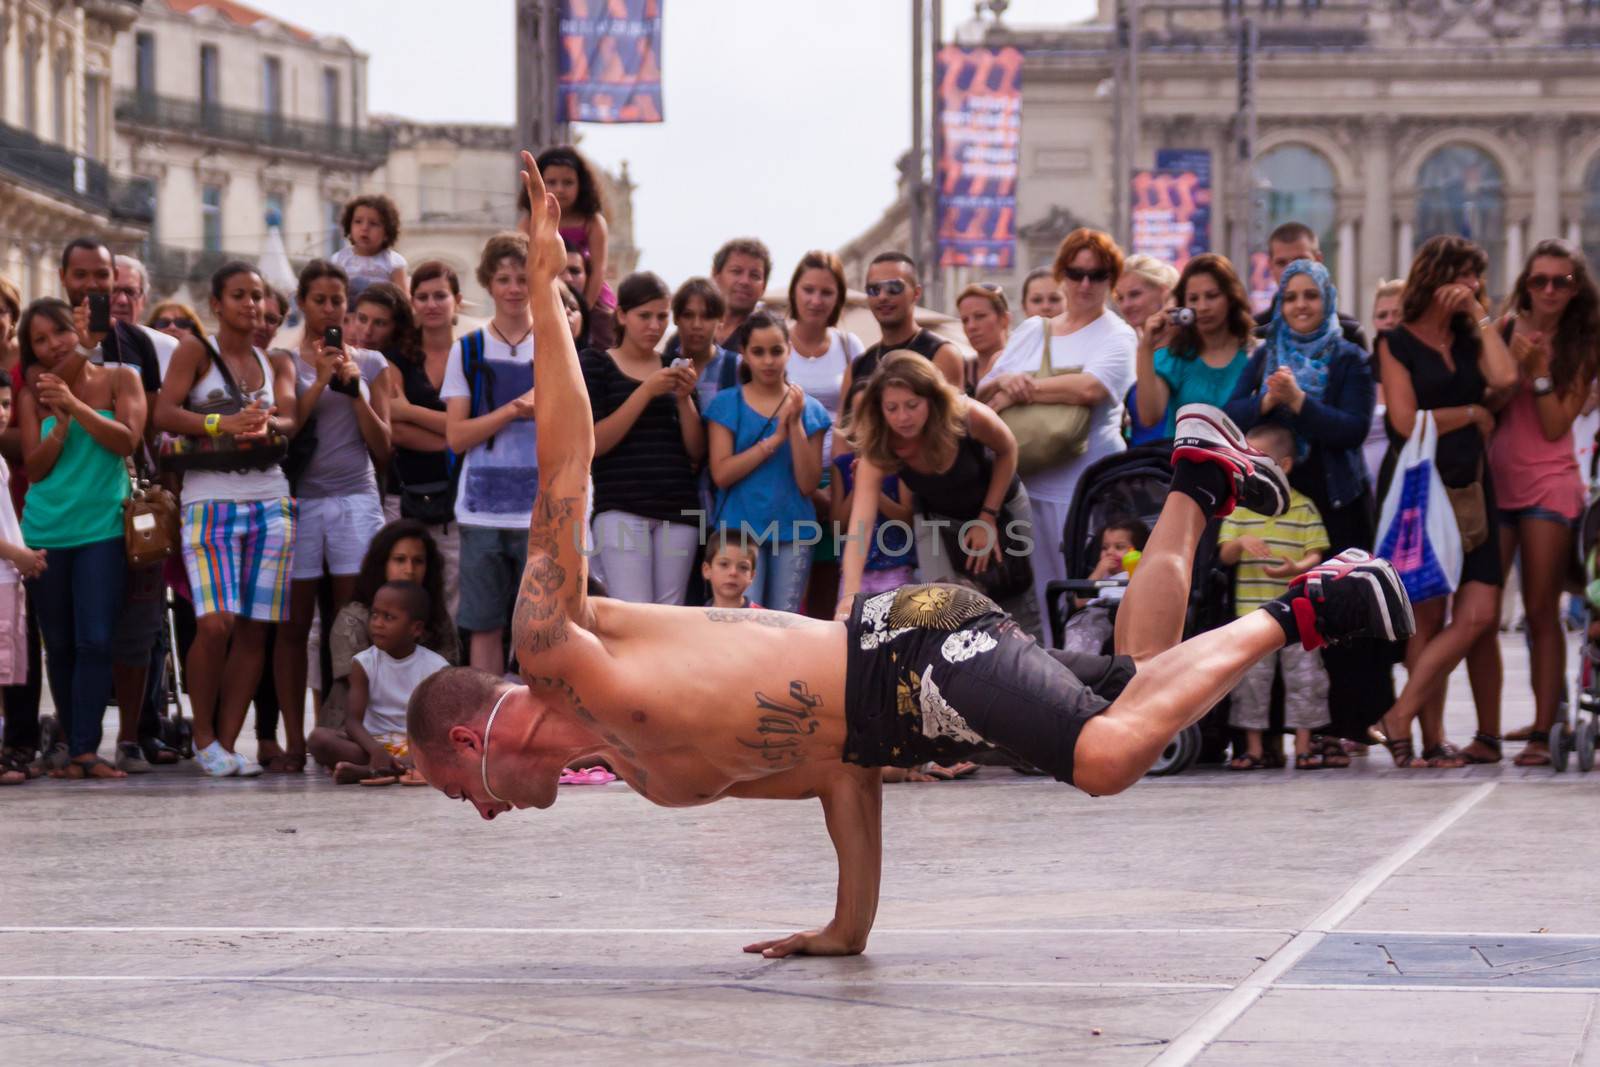 MONTPELLIER - JULY 12: Street performer breakdancing in front of the random crowd on July 12, 2011 in  Montpellier, France; B-boying or breaking is a style of street dance that originated among African American and Puerto Rican youths in New York City during the early 1970s.